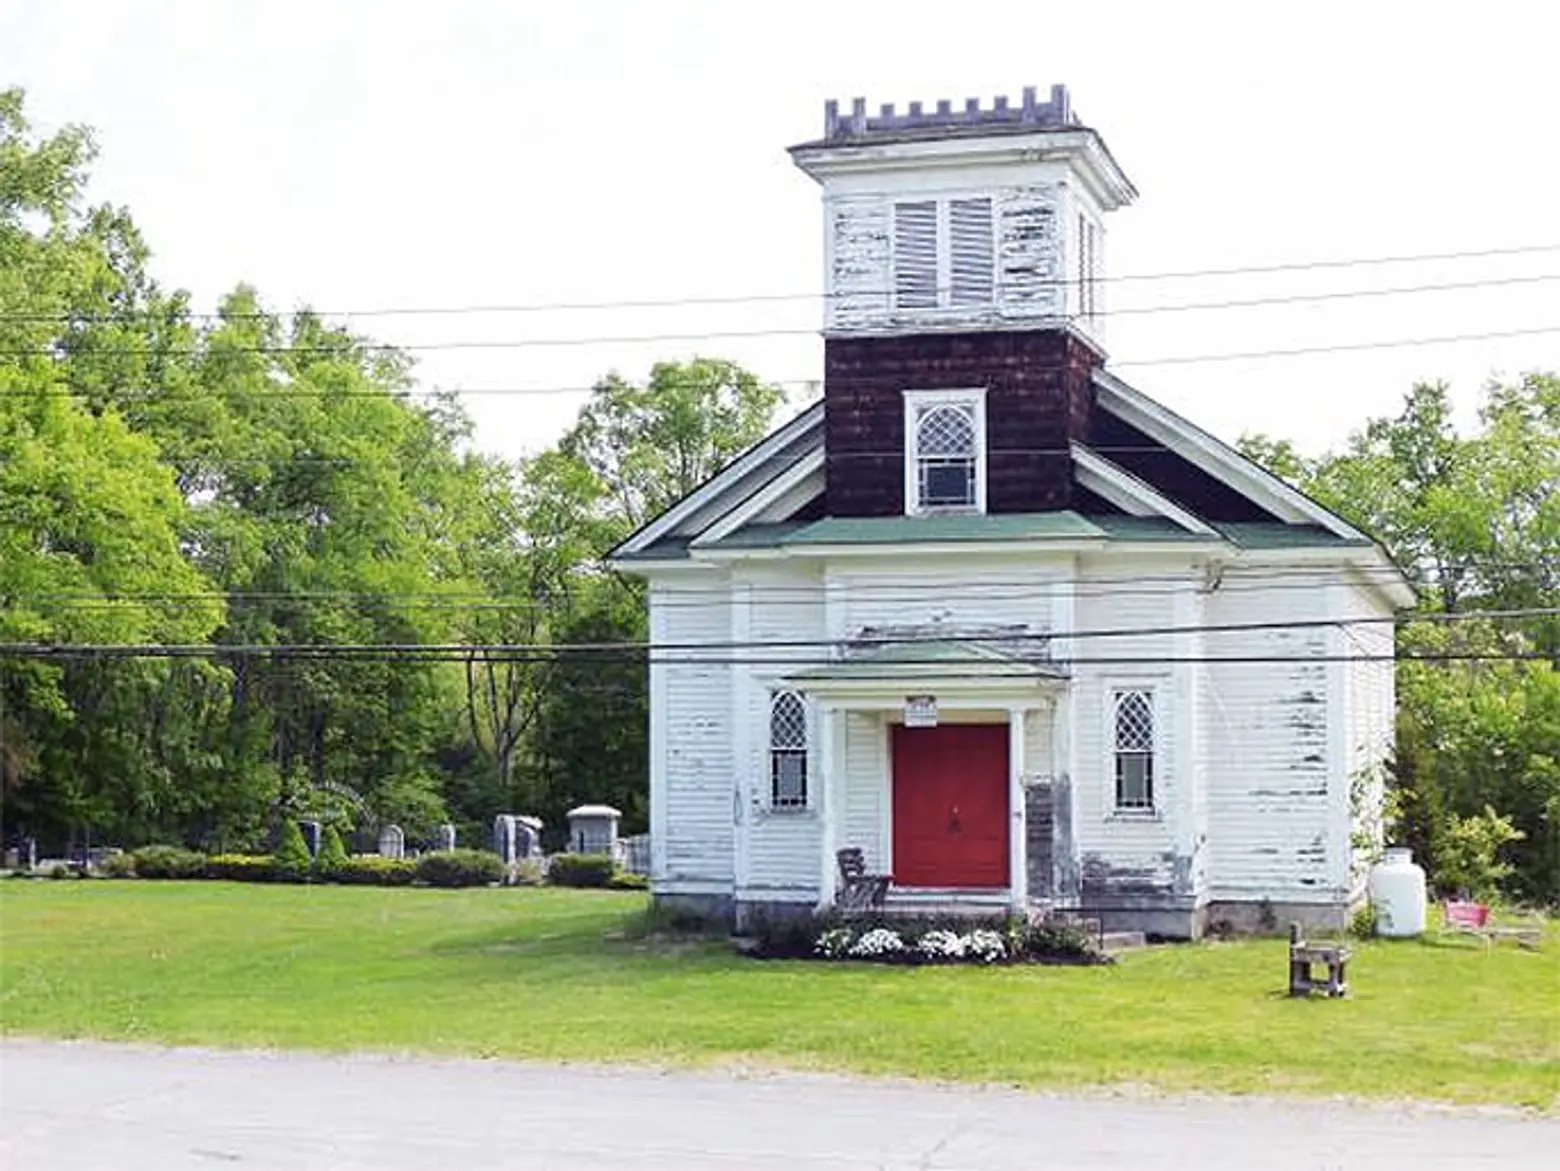 Own a Charming Wood Frame Church in the Catskills for $99,000